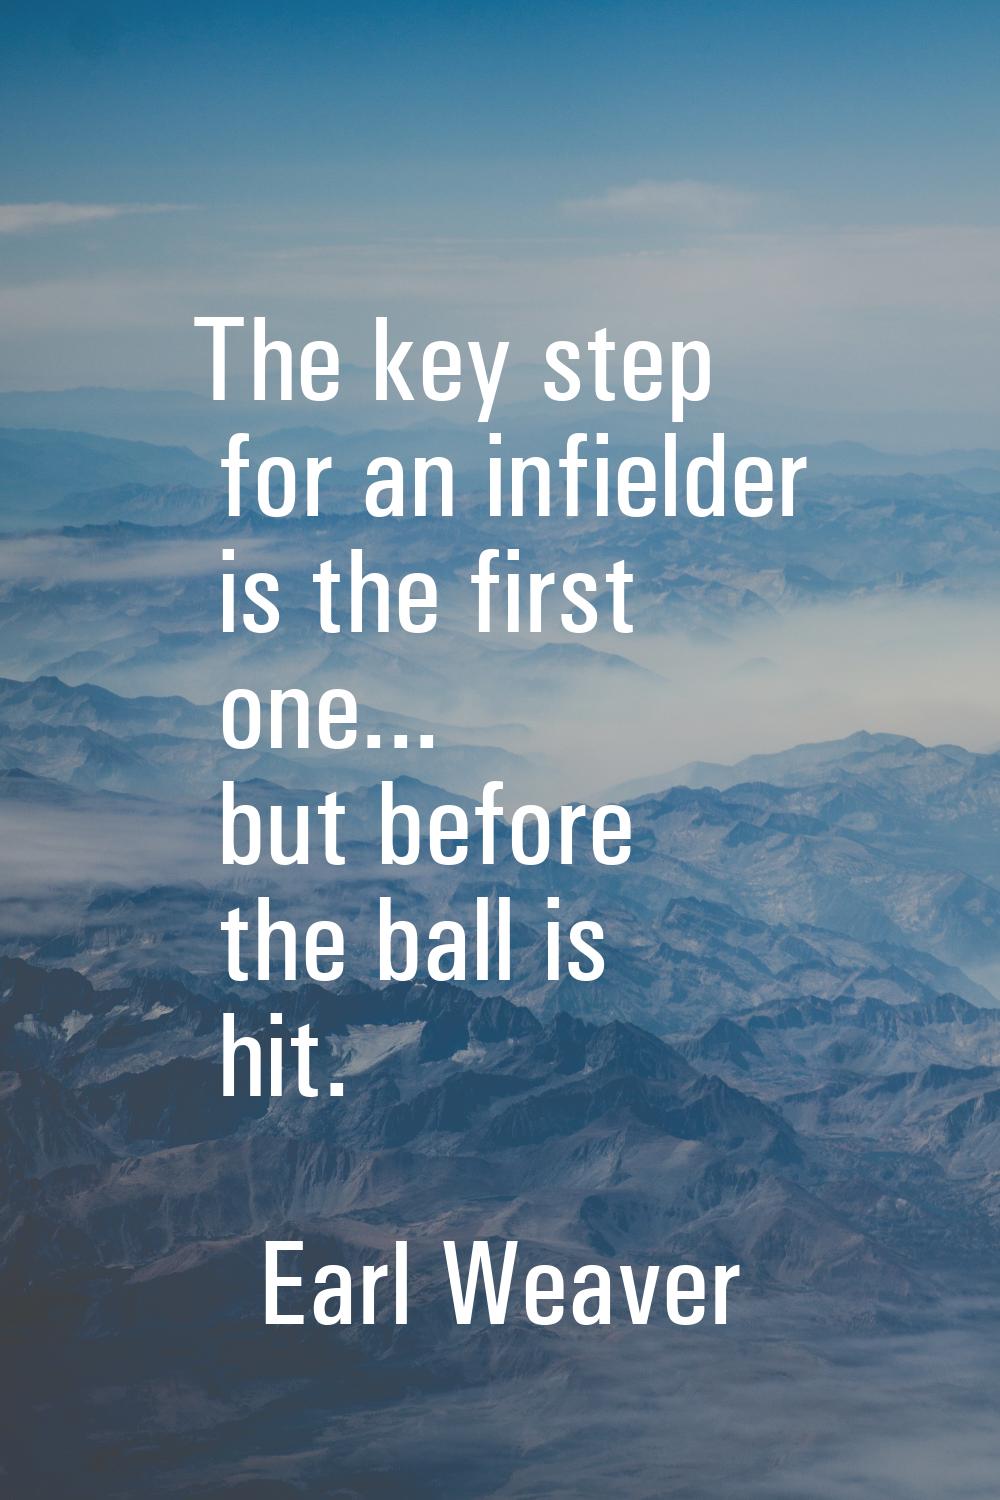 The key step for an infielder is the first one... but before the ball is hit.